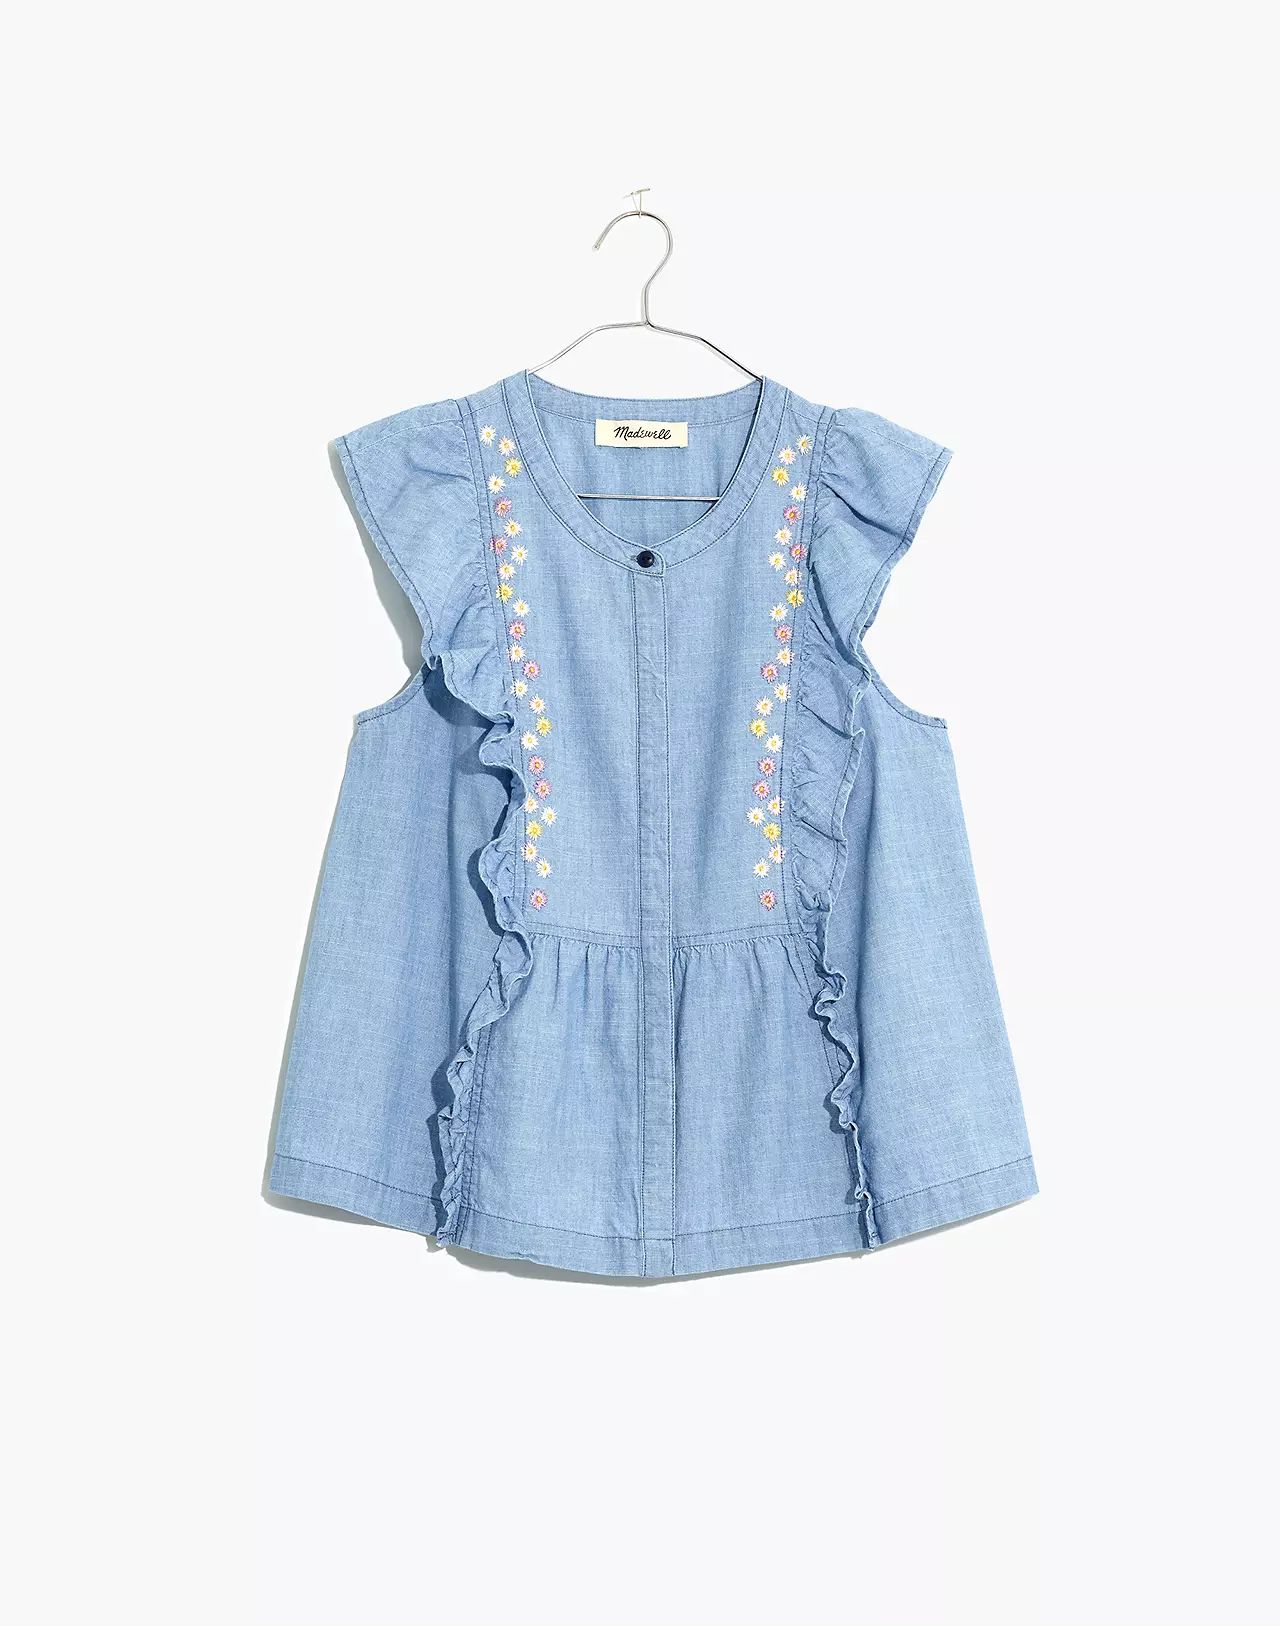 Floral Embroidered Denim Ruffle Top | Madewell